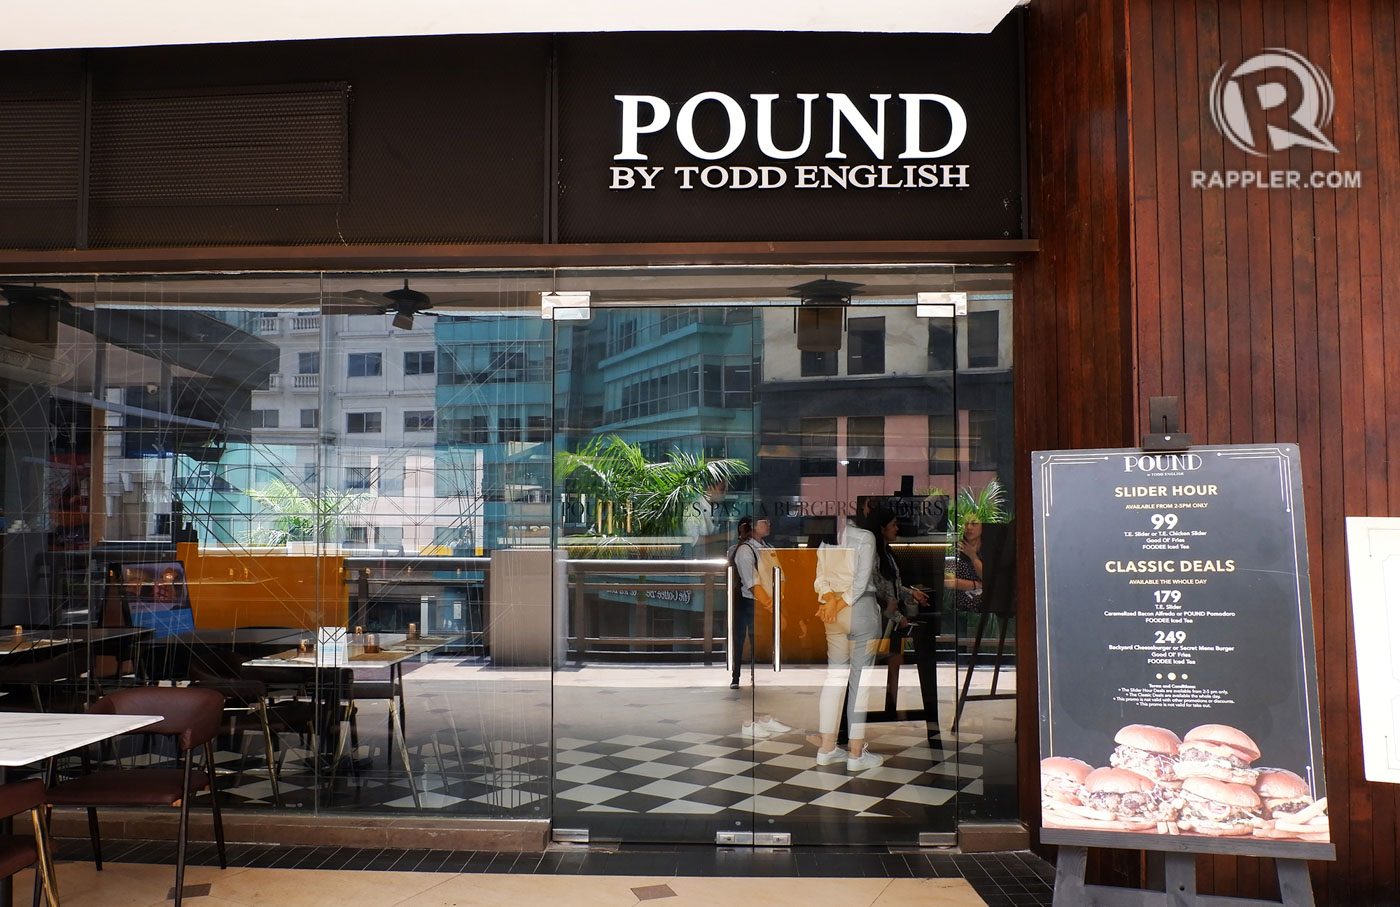 POUND. The restaurant serves up burgers, pasta, risotto tater tots and more. 